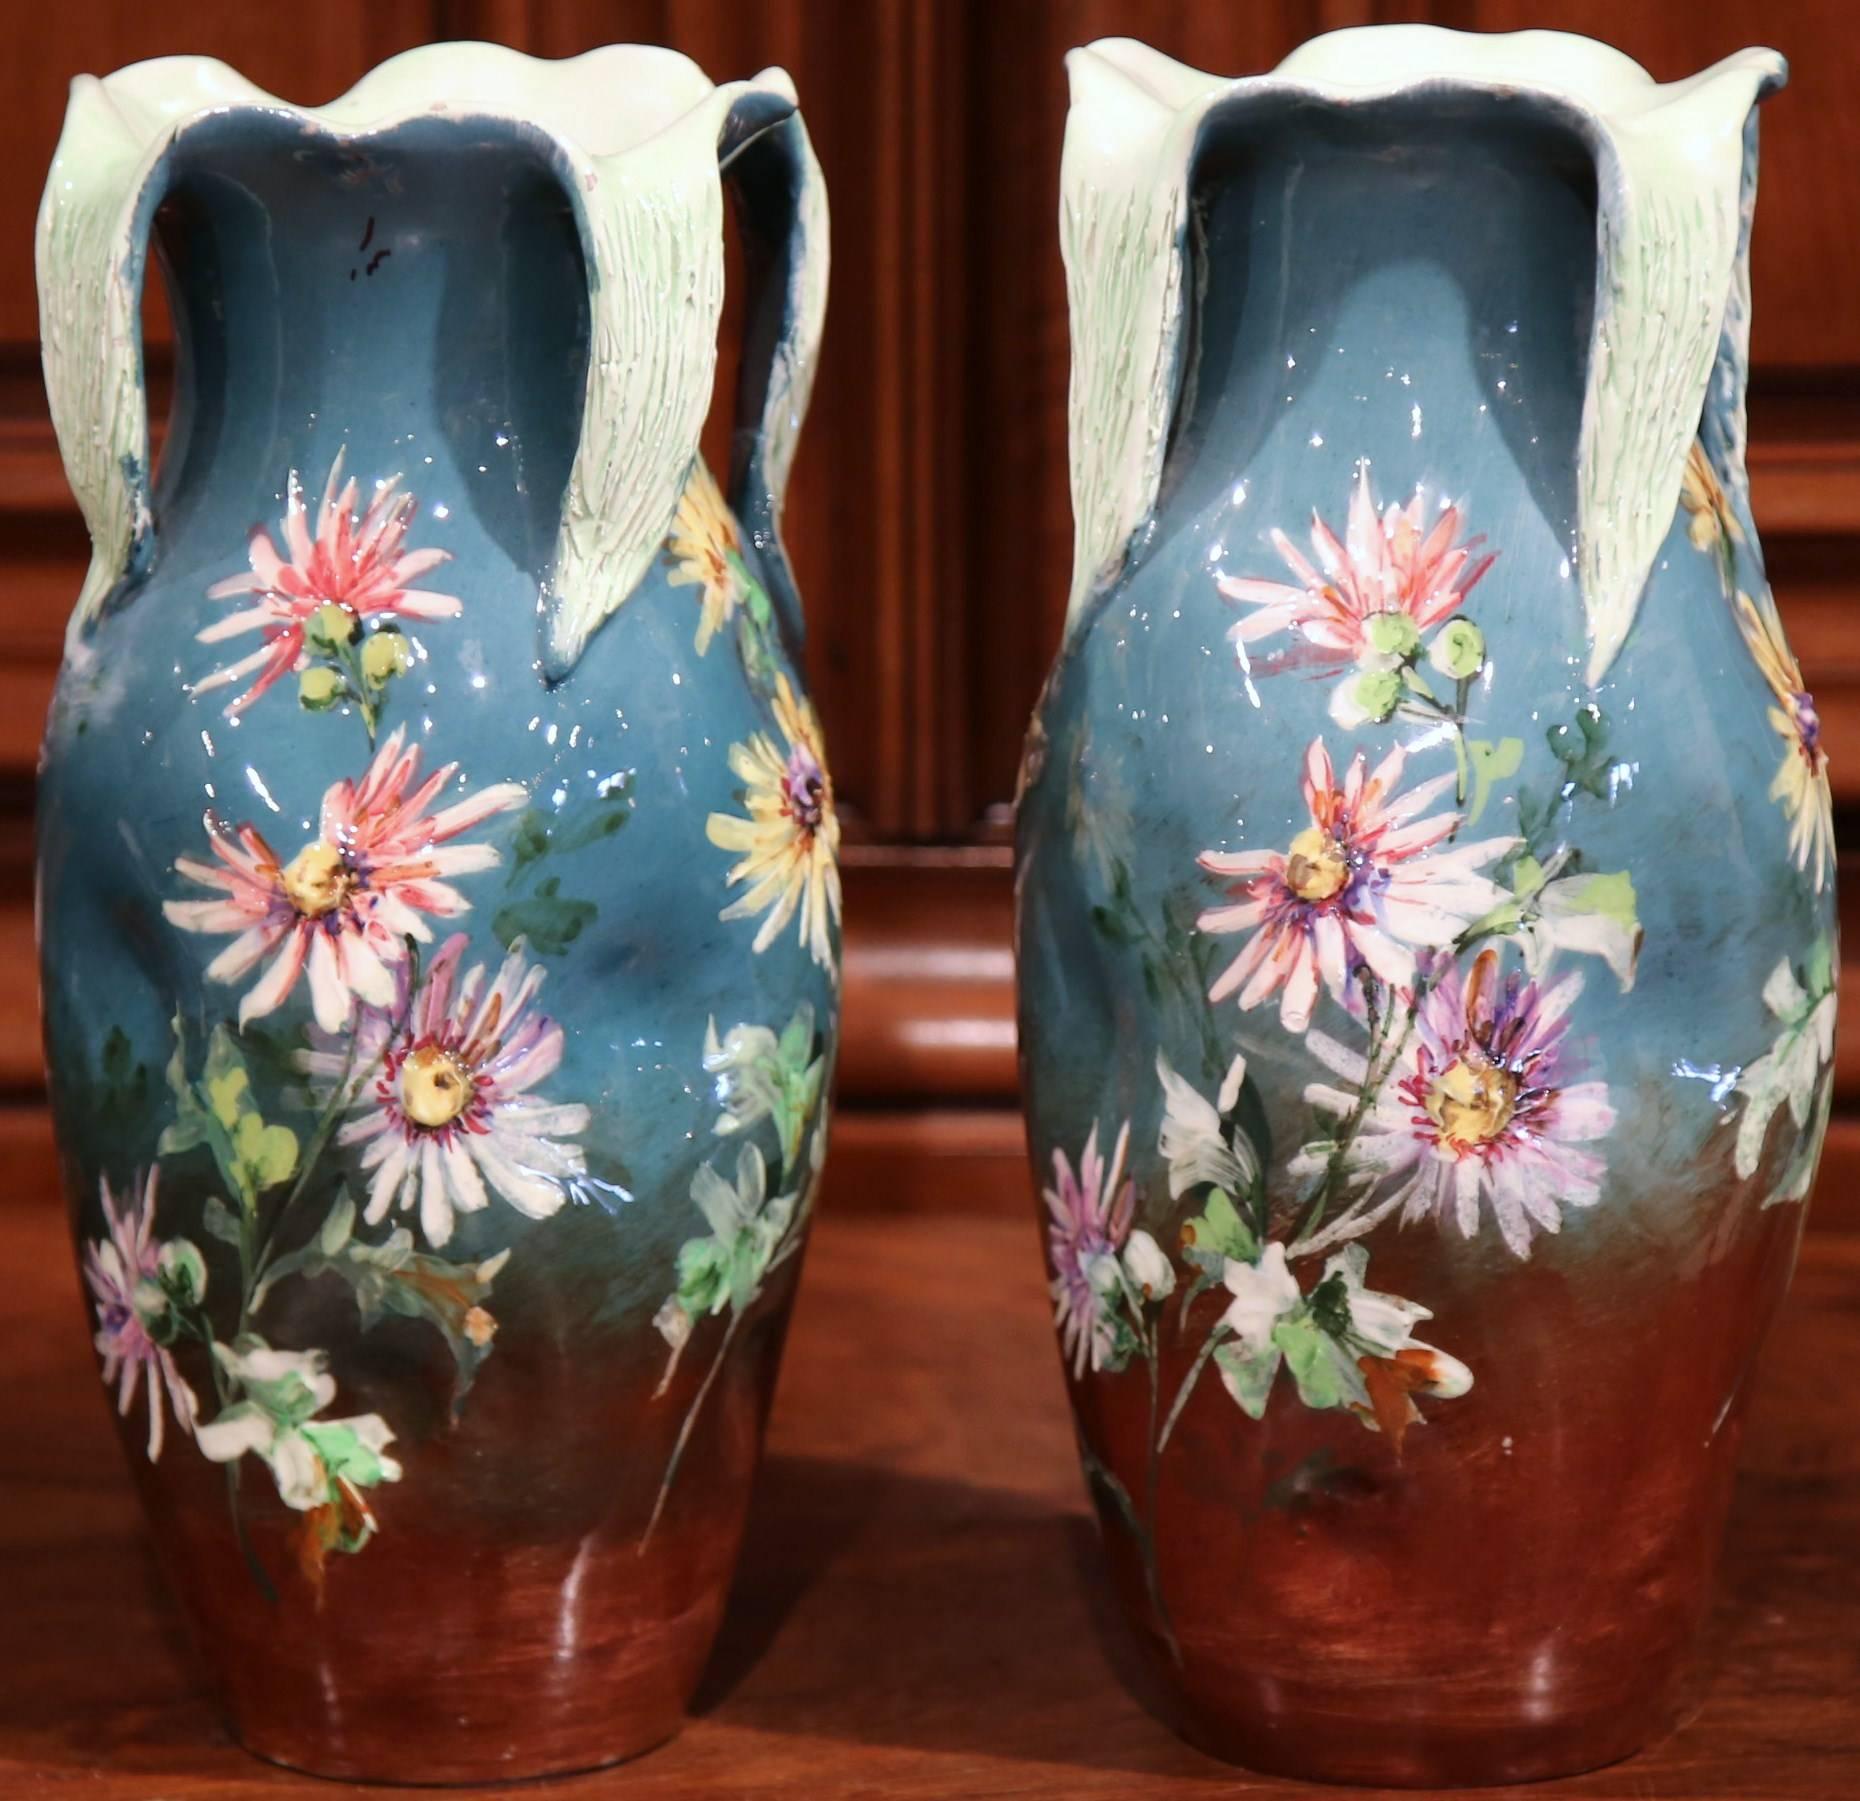 Place these tall and colorful antique Majolica vases on a mantel or a console. Sculpted in Vallauris, France, circa 1880, these ceramic vases feature hand painted daisies in the pink and yellow palette, embellished with four green curled back leaves